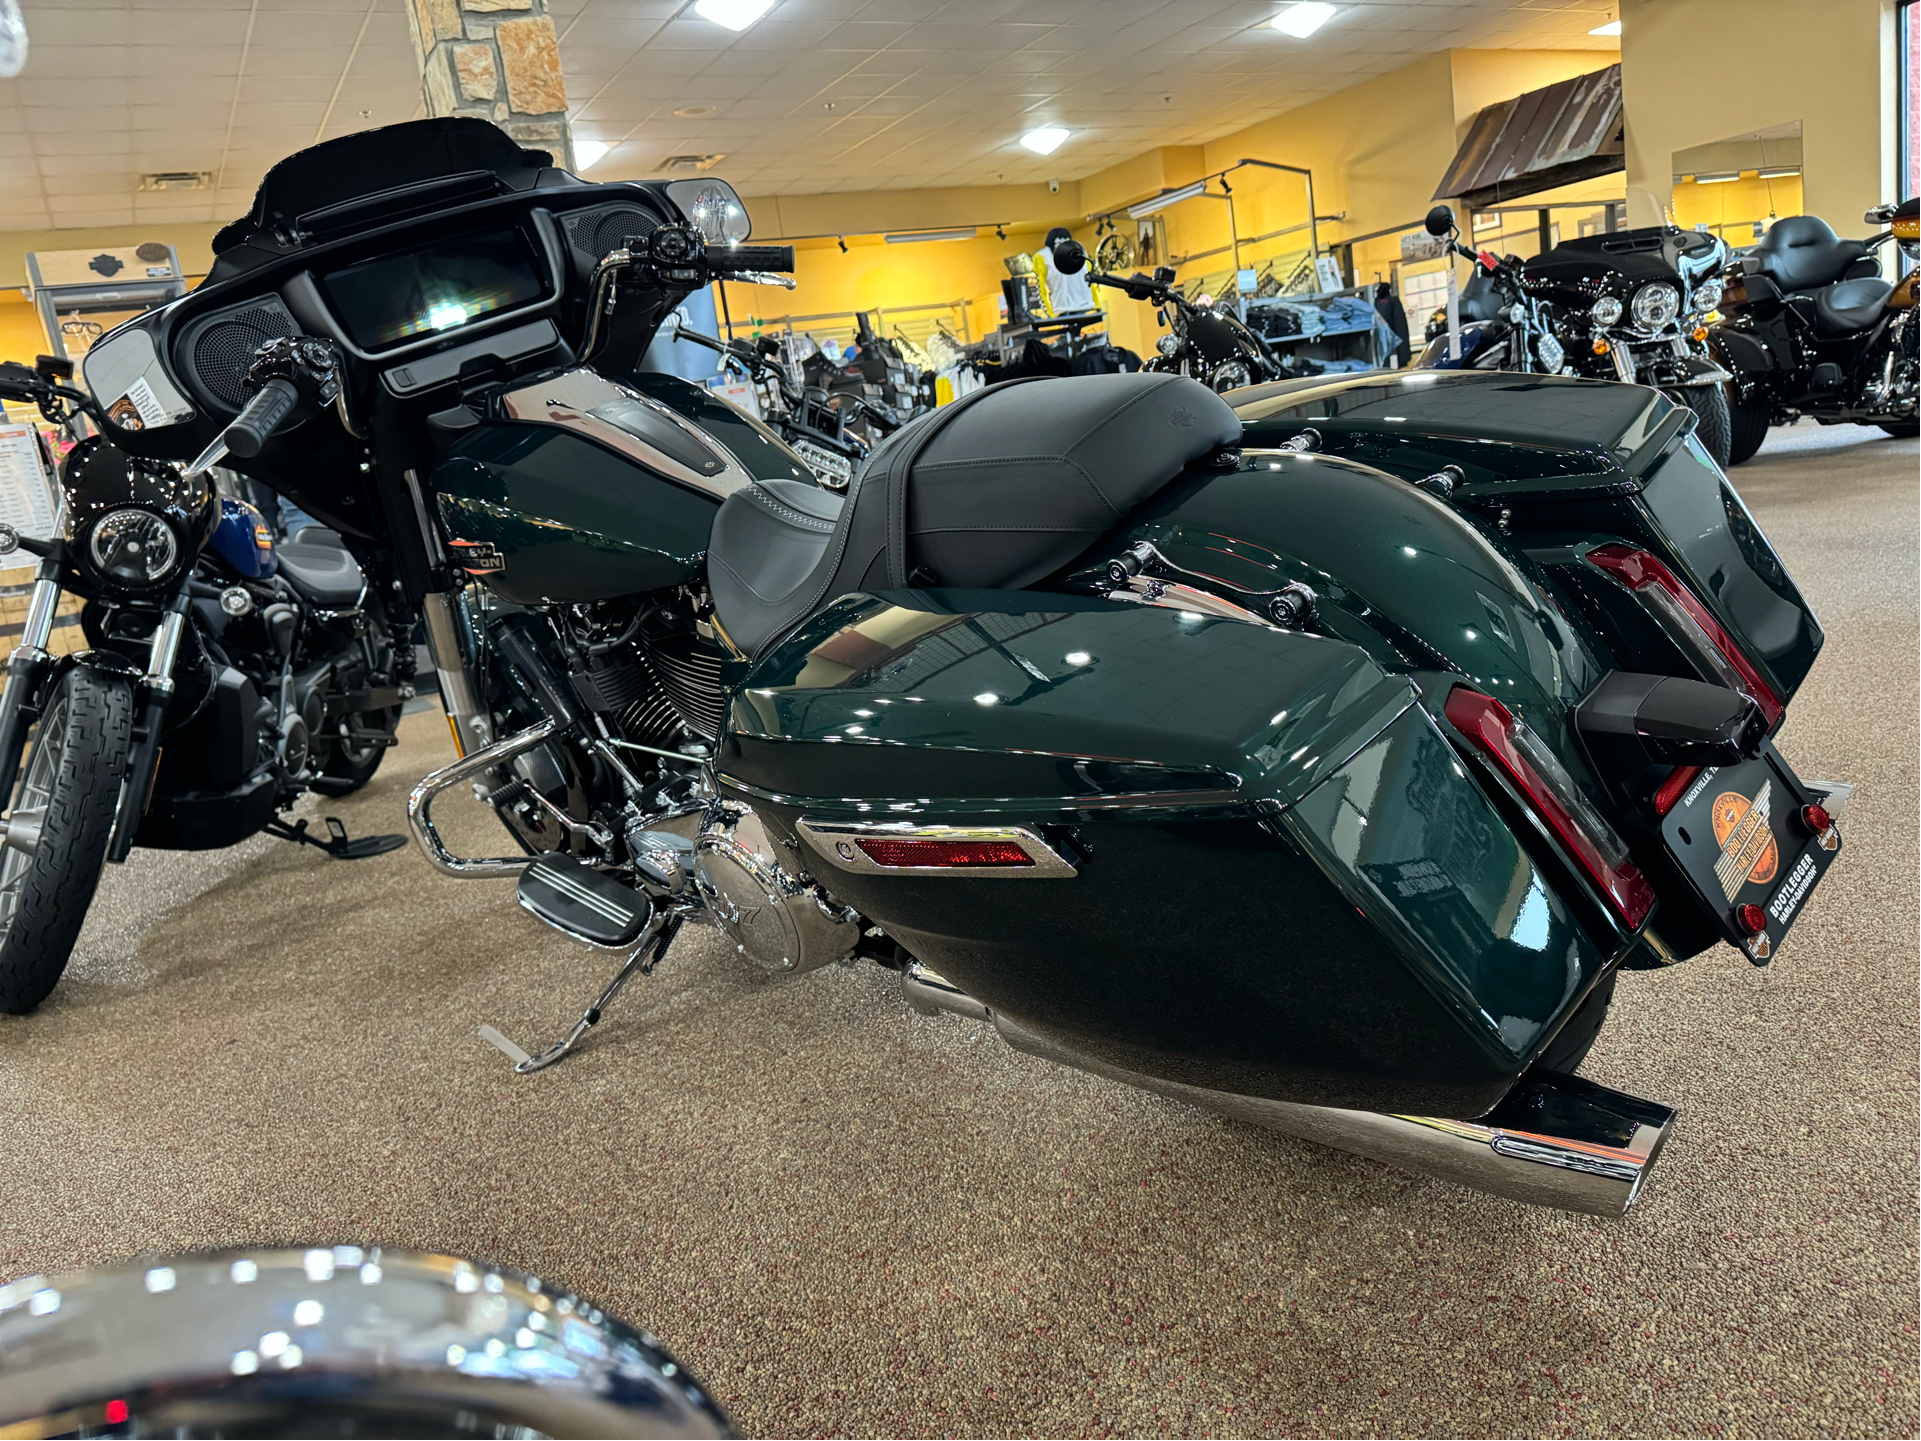 2024 Harley-Davidson Street Glide® in Knoxville, Tennessee - Photo 11